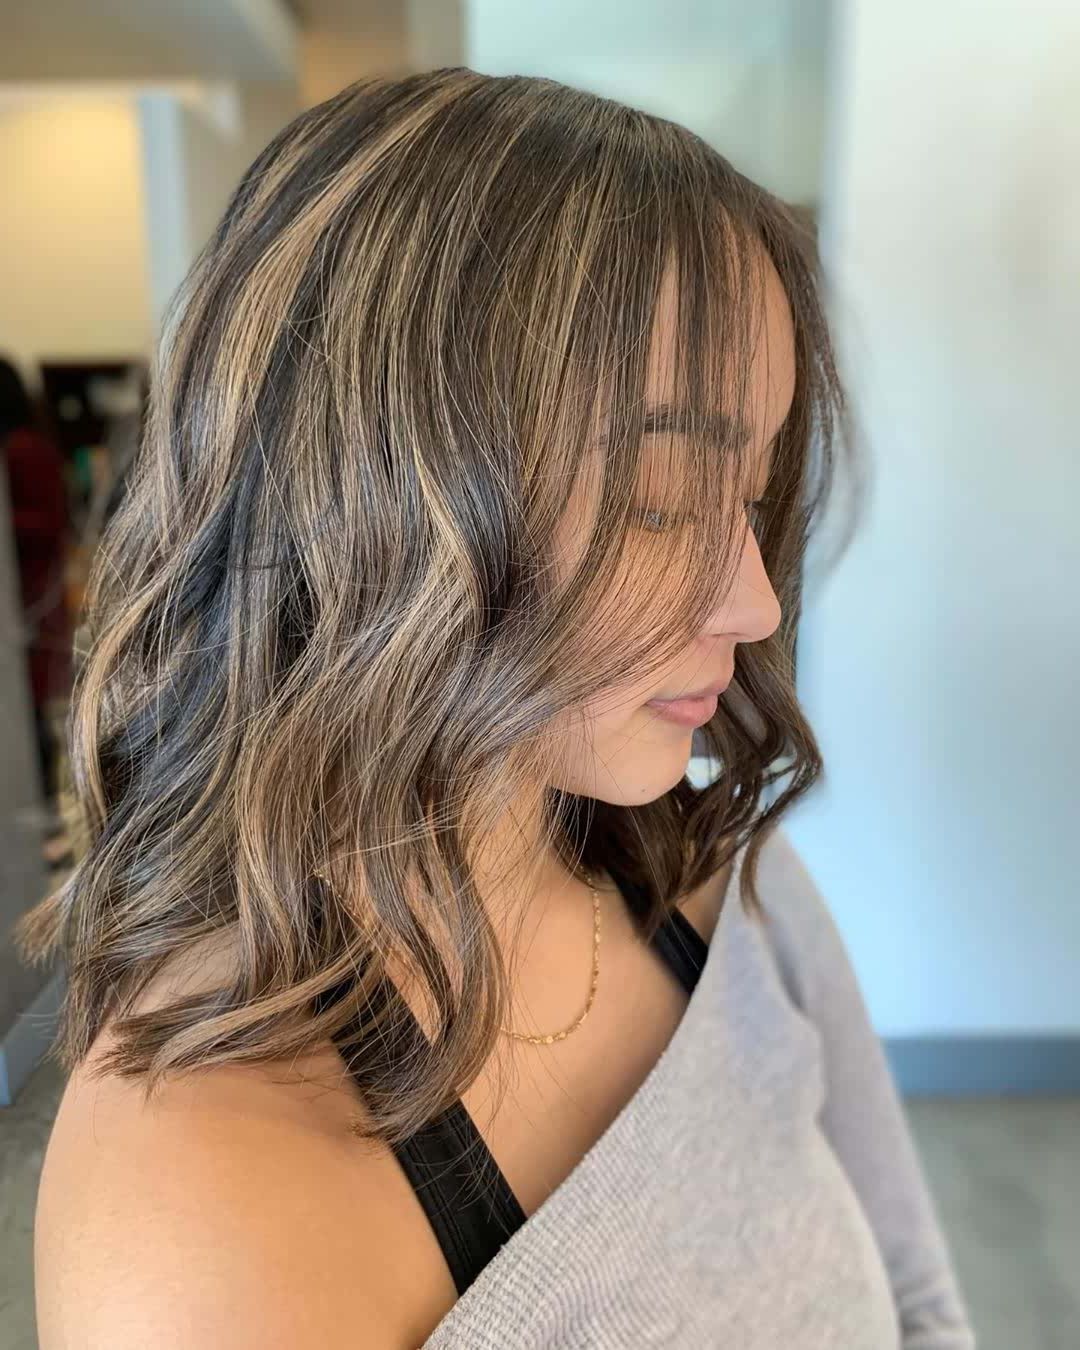 9 Lob Ideas For In Between Haircuts – Her Style Code Throughout Popular Lob Haircuts With Ash Blonde Highlights (View 15 of 20)